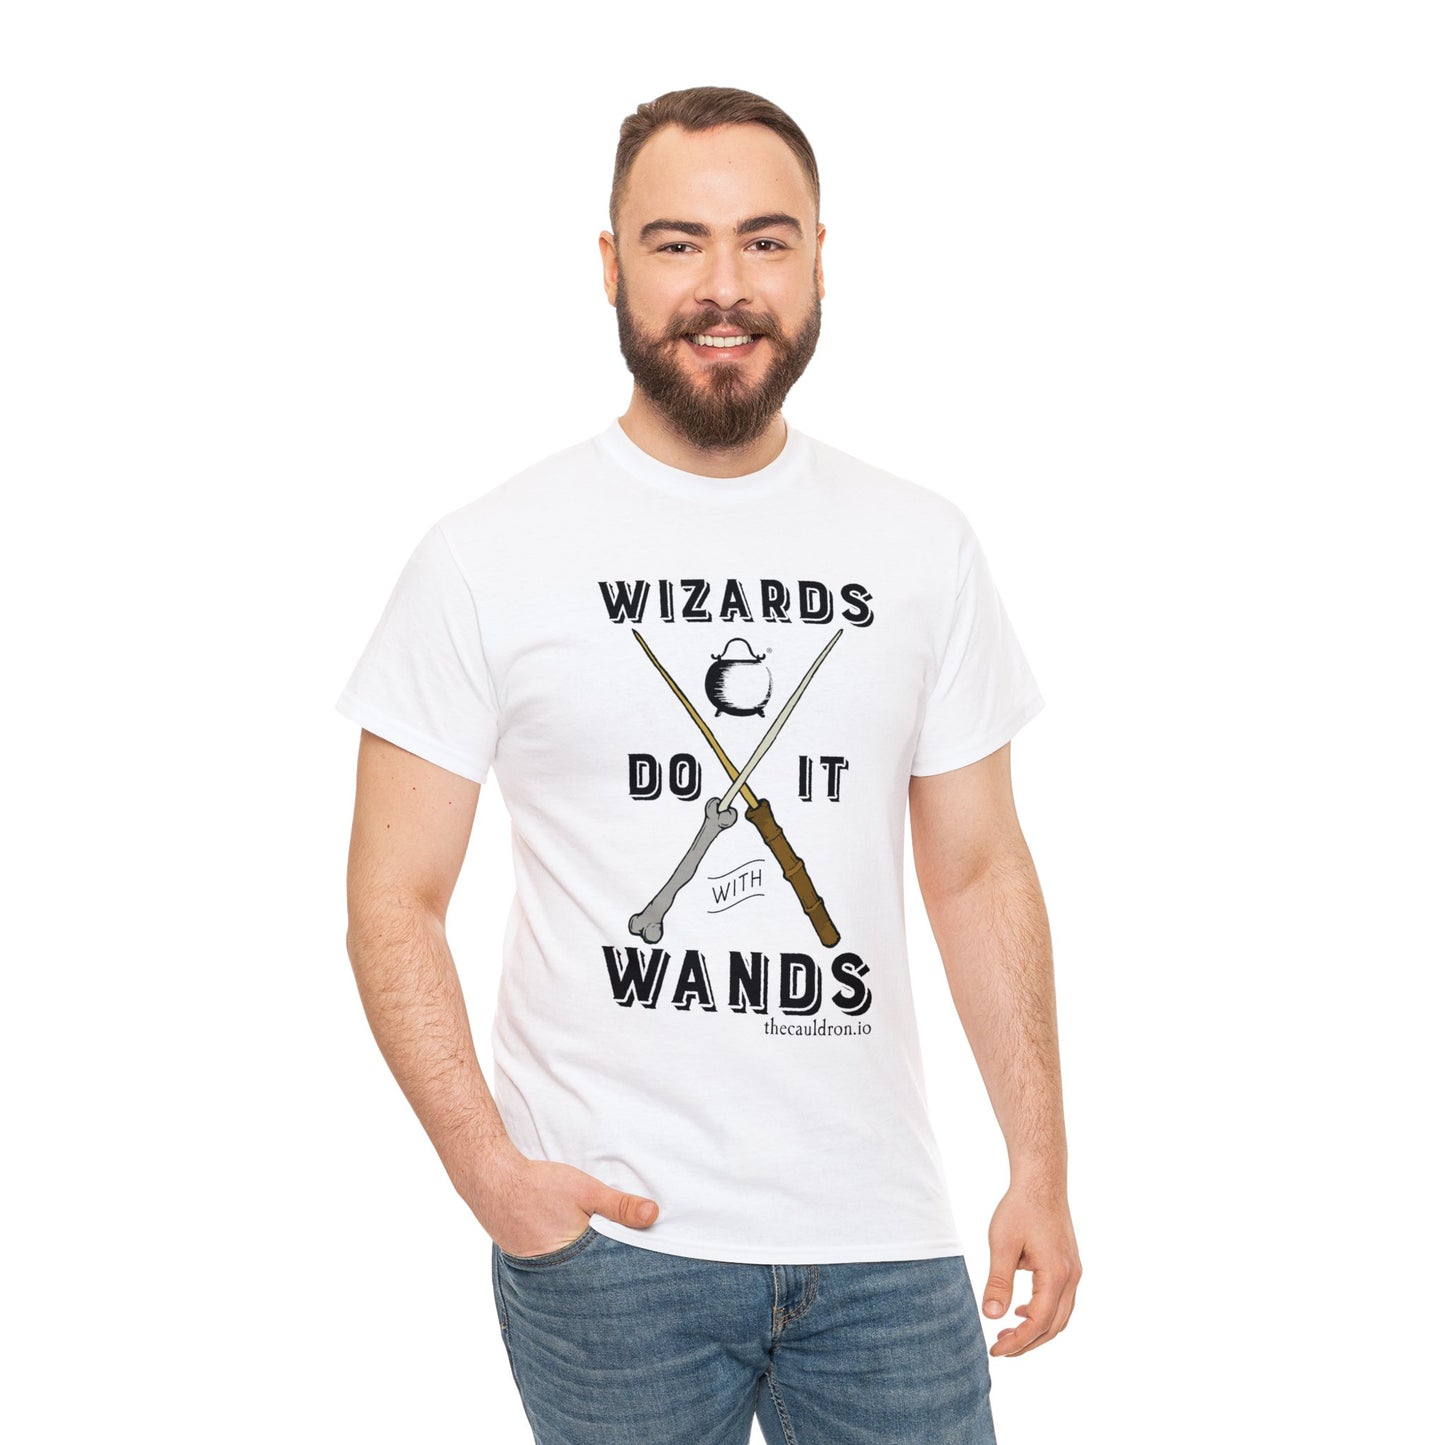 Wizards Do it - Special Edition Graphic Tee